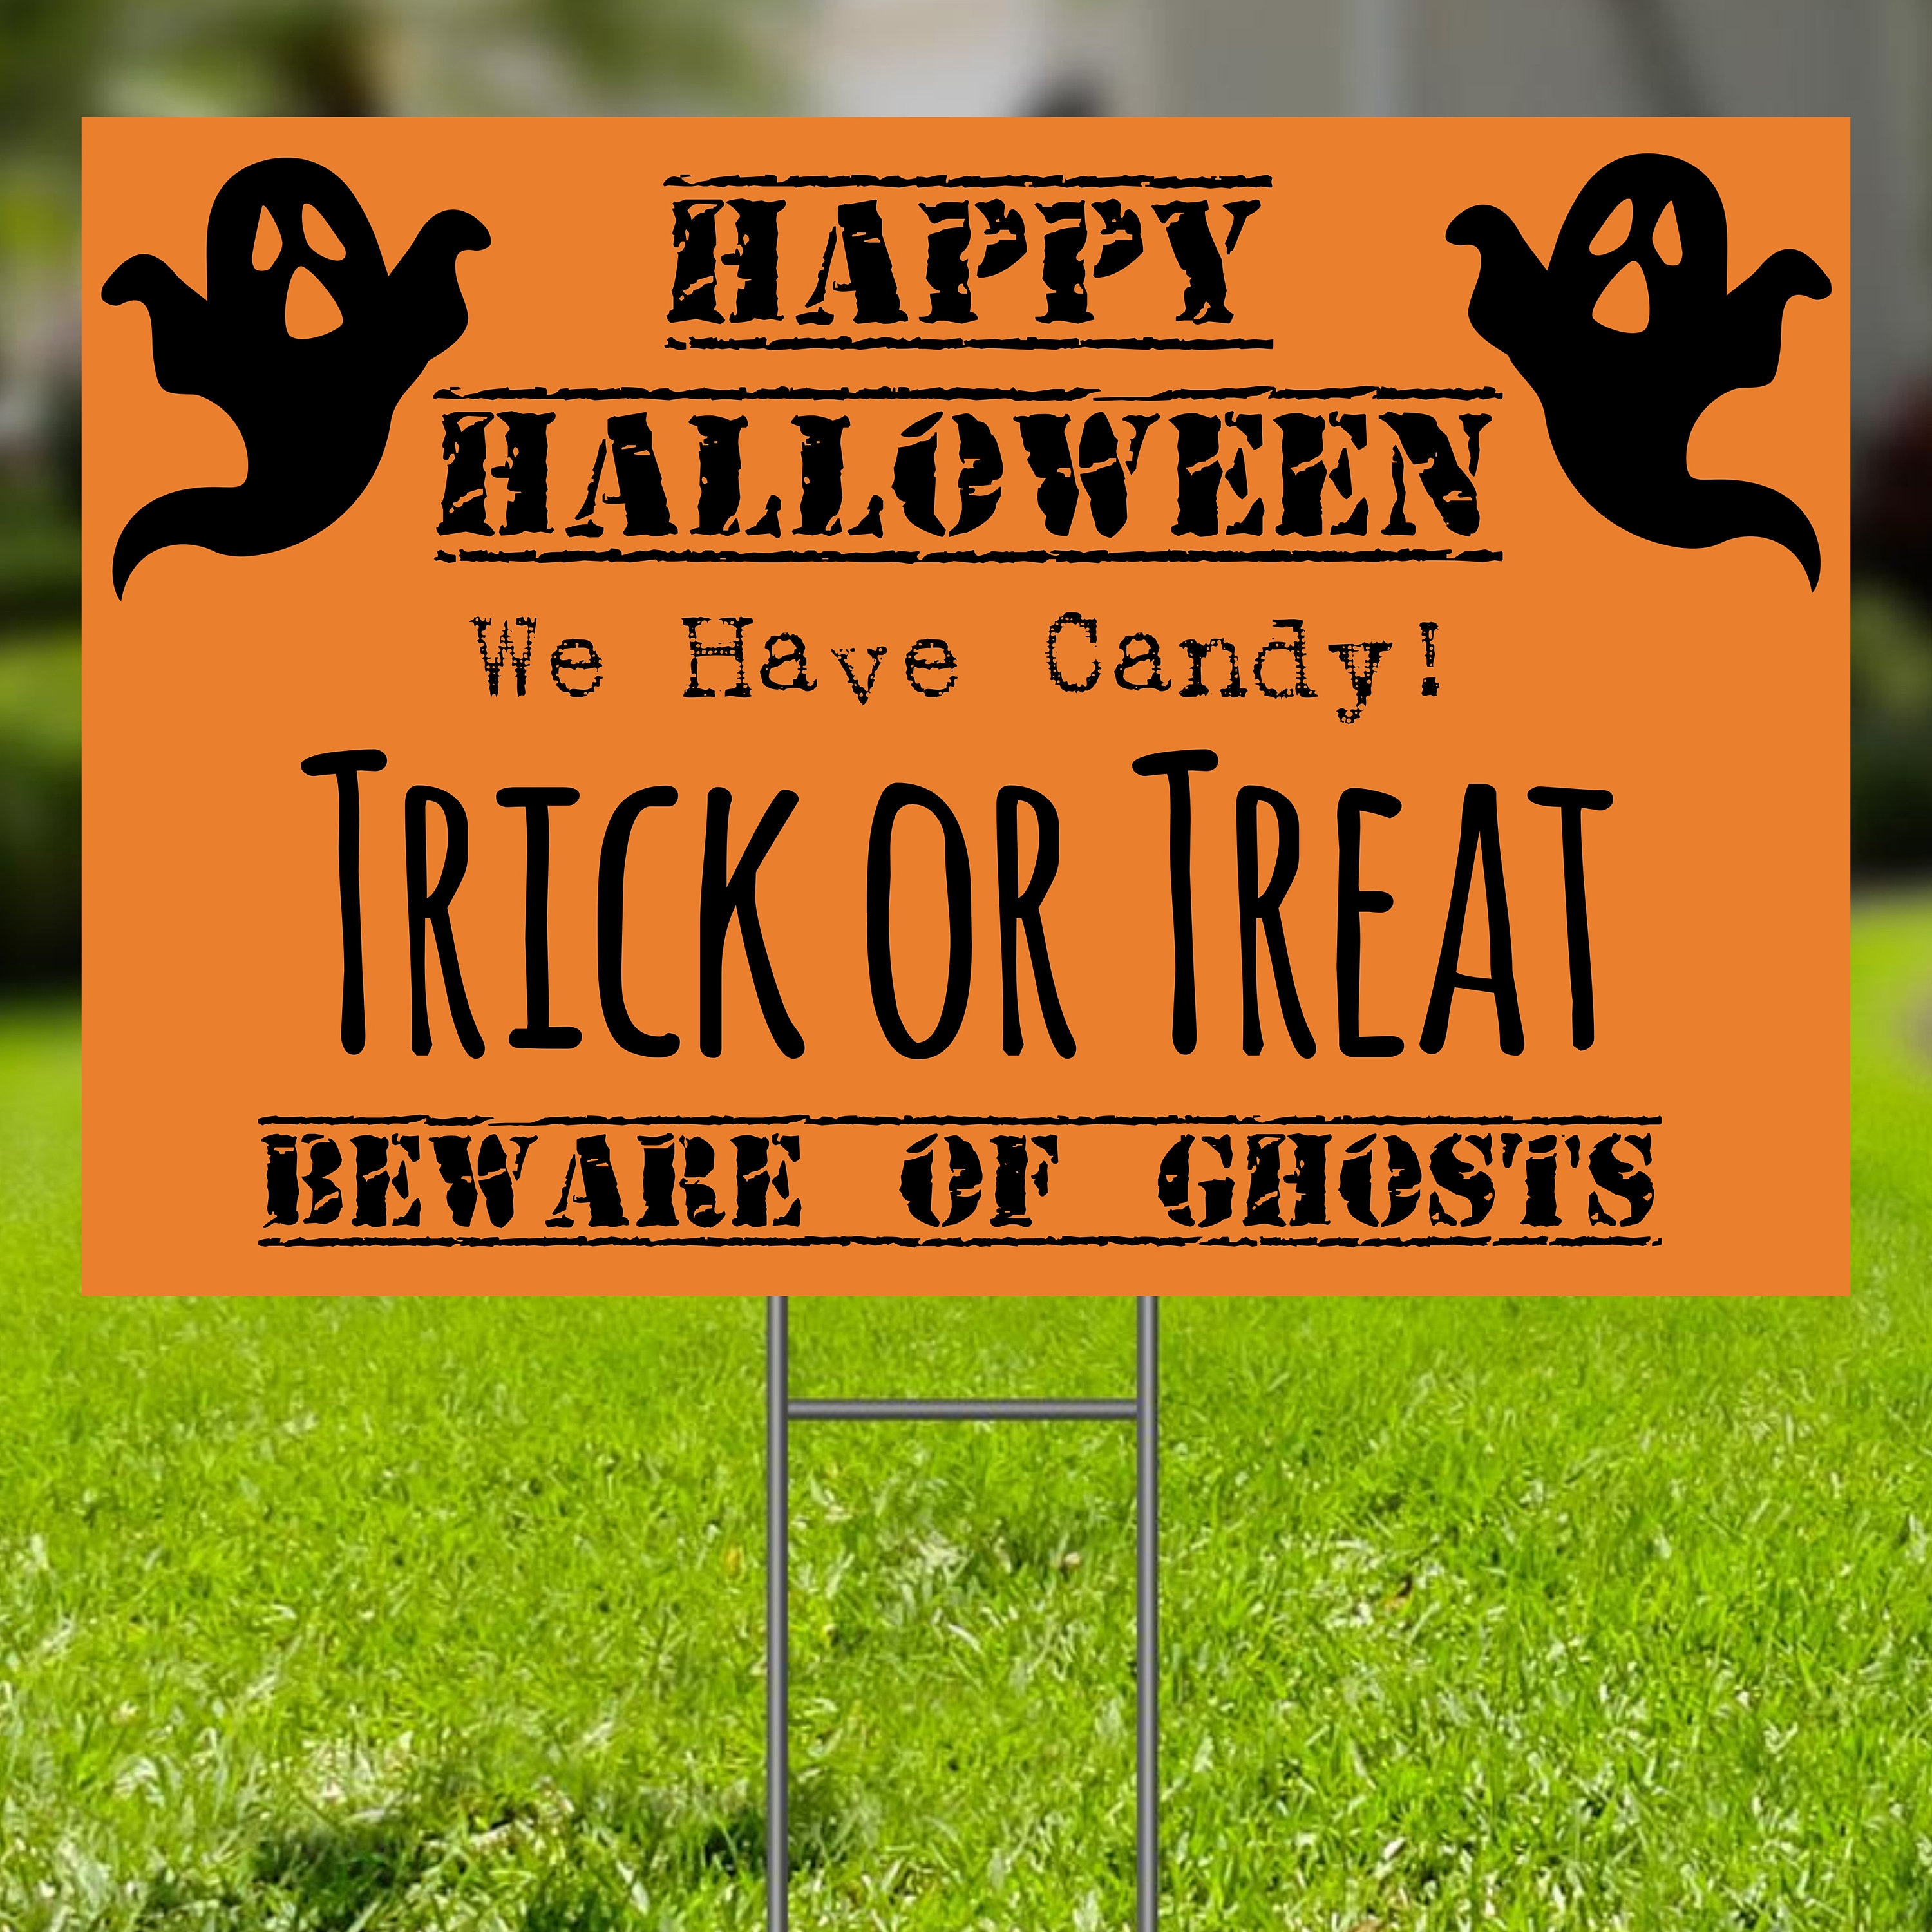 A.B.E. Doors & Windows - Happy Monday! How many of us still have a sugar  rush from eating too much Halloween Candy? Have a great week!